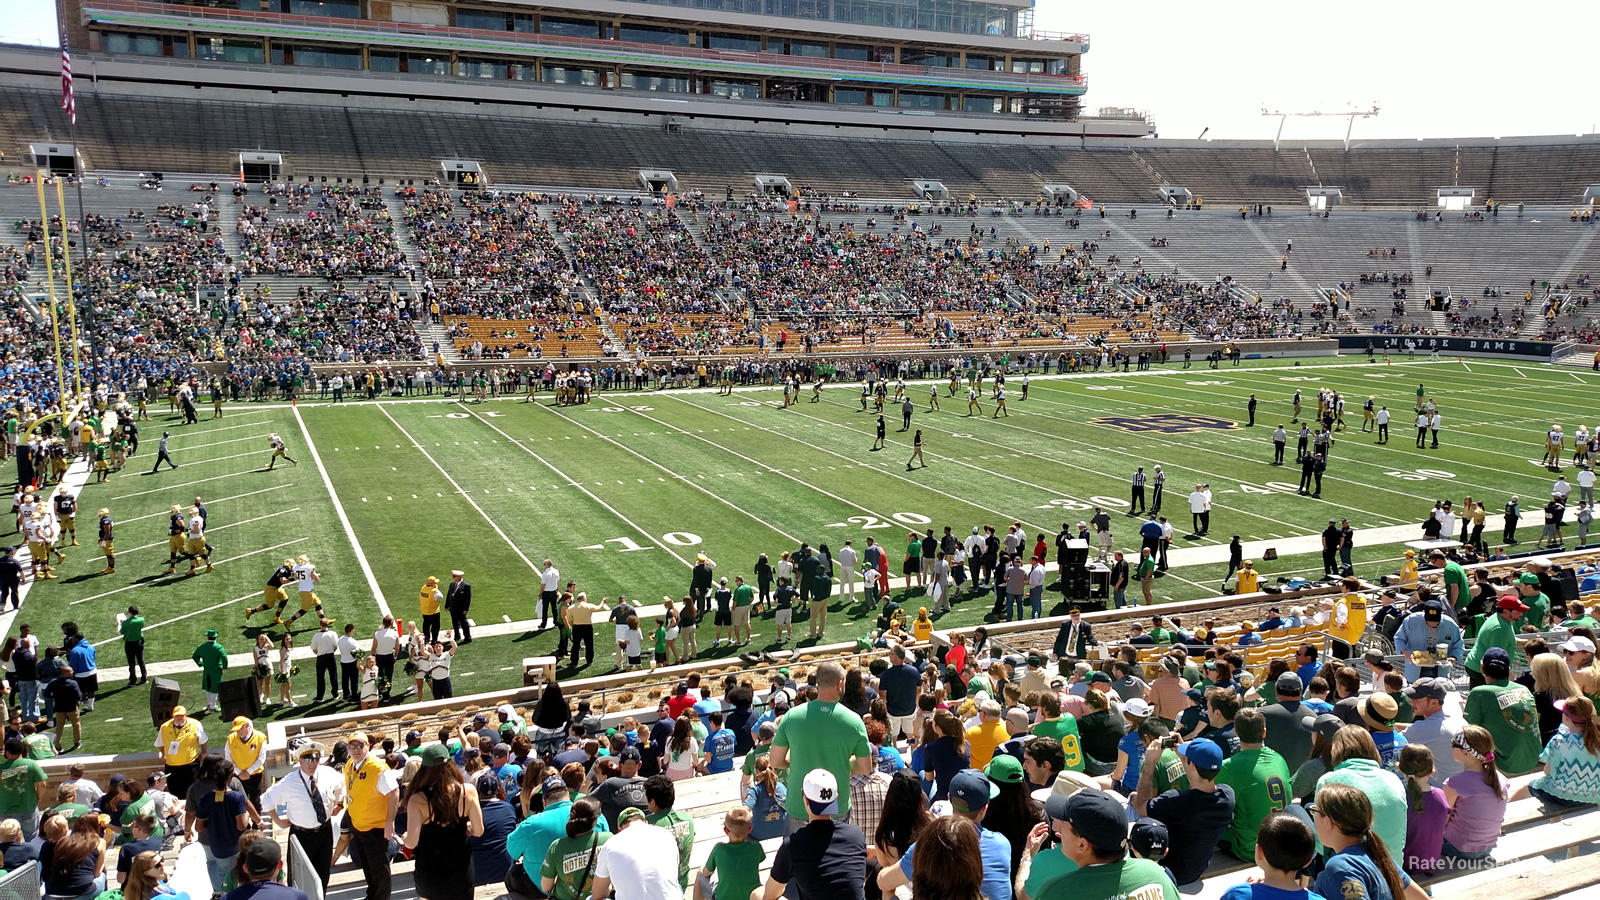 section 31, row 36 seat view  - notre dame stadium